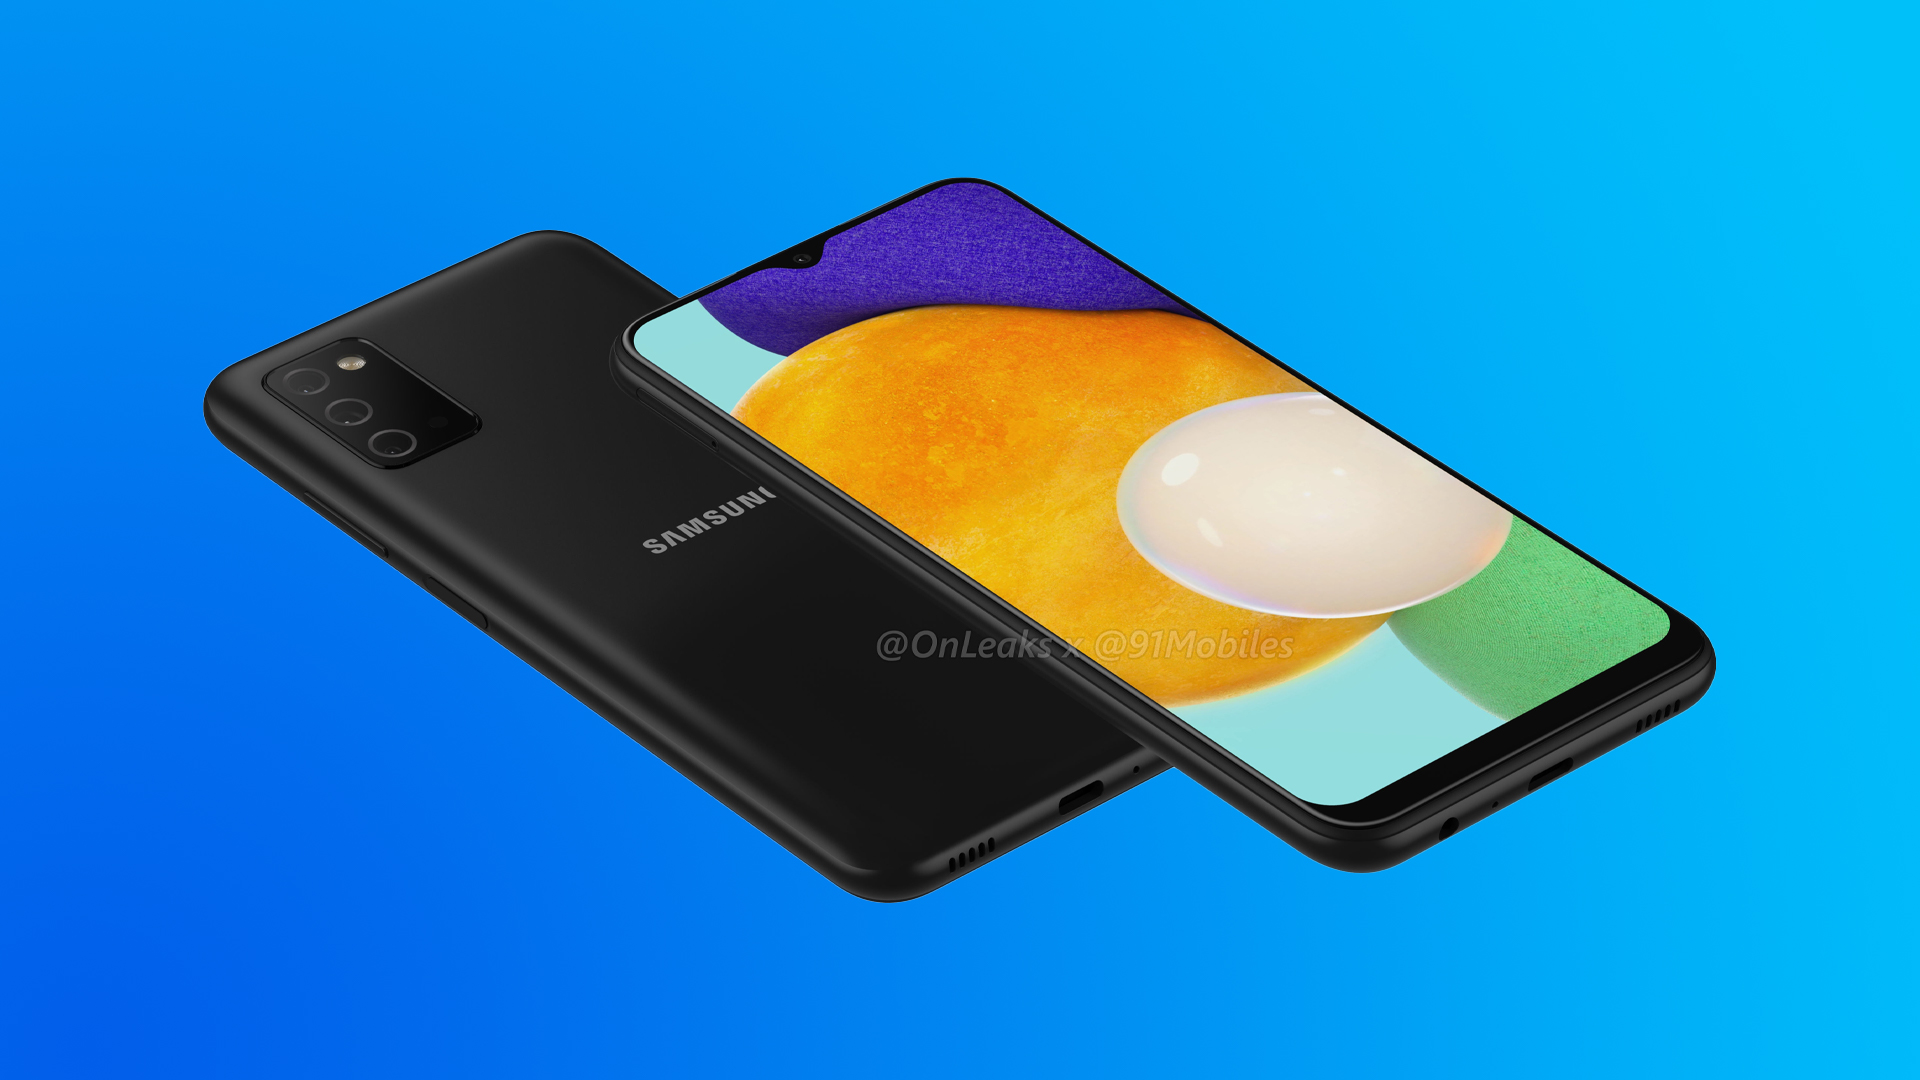 Samsung Galaxy A03 Arrives On Wi-Fi Alliance Certification Site